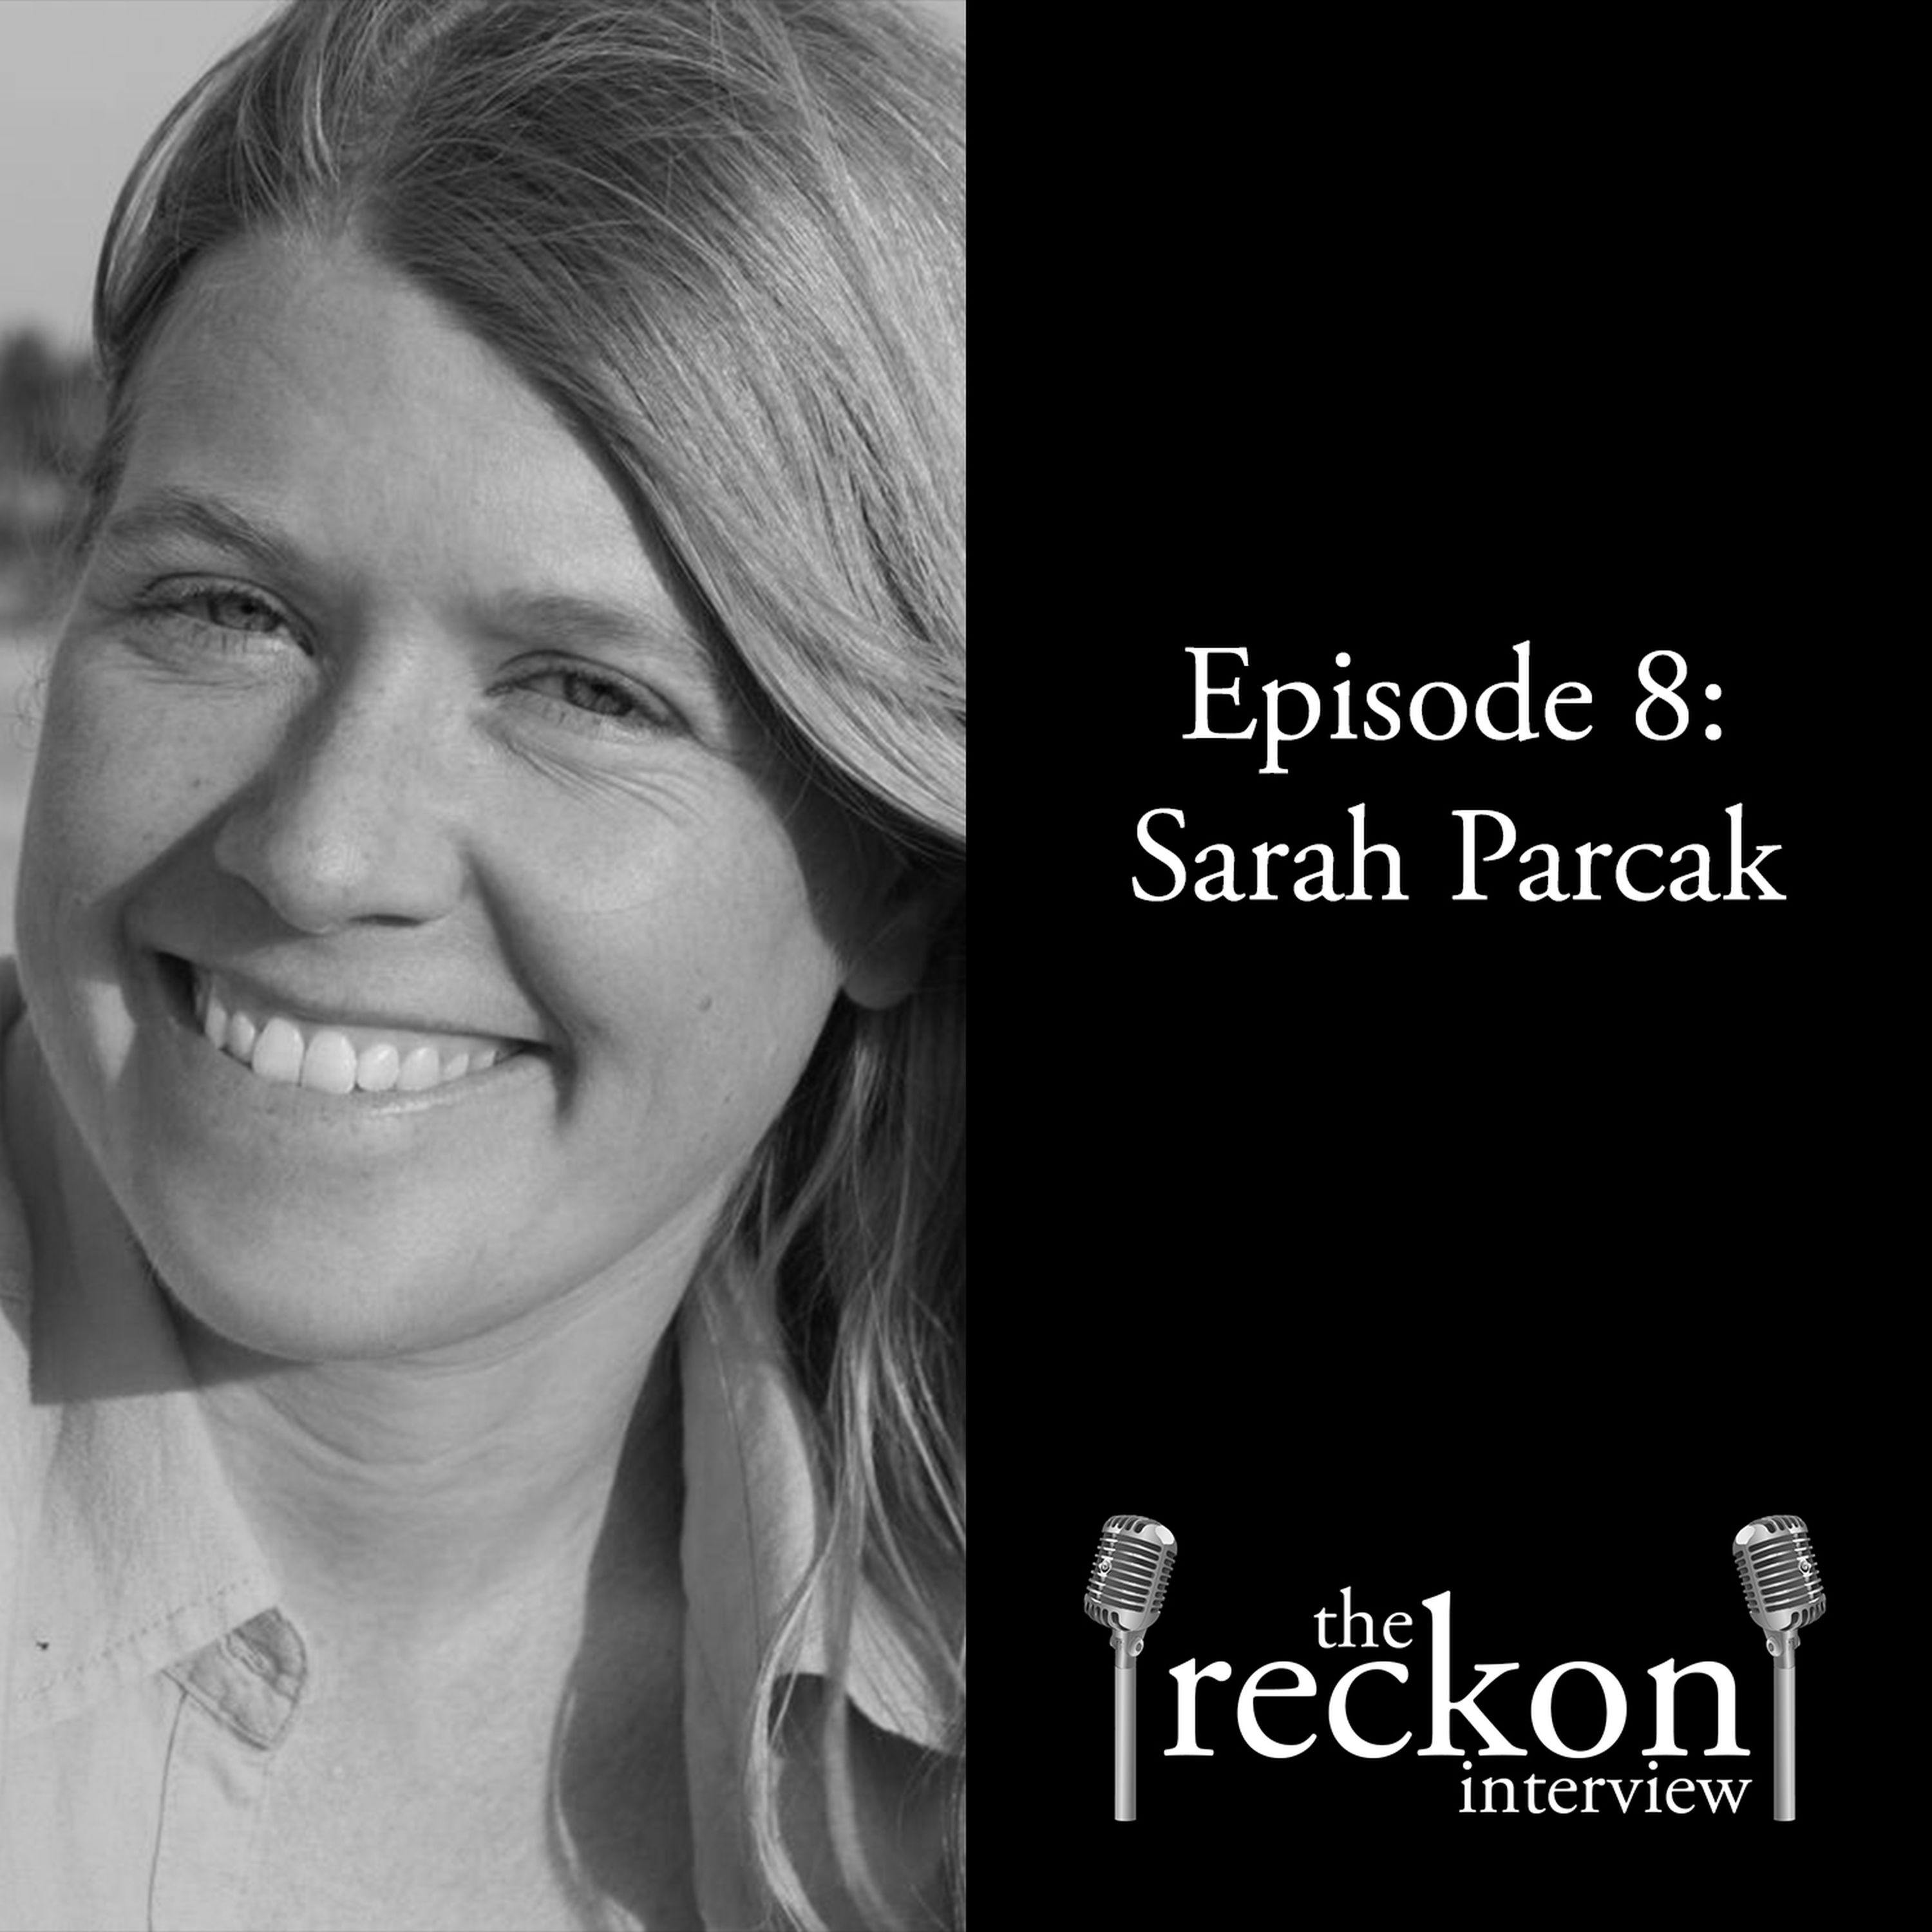 Sarah Parcak on space archaeology and the history of the South